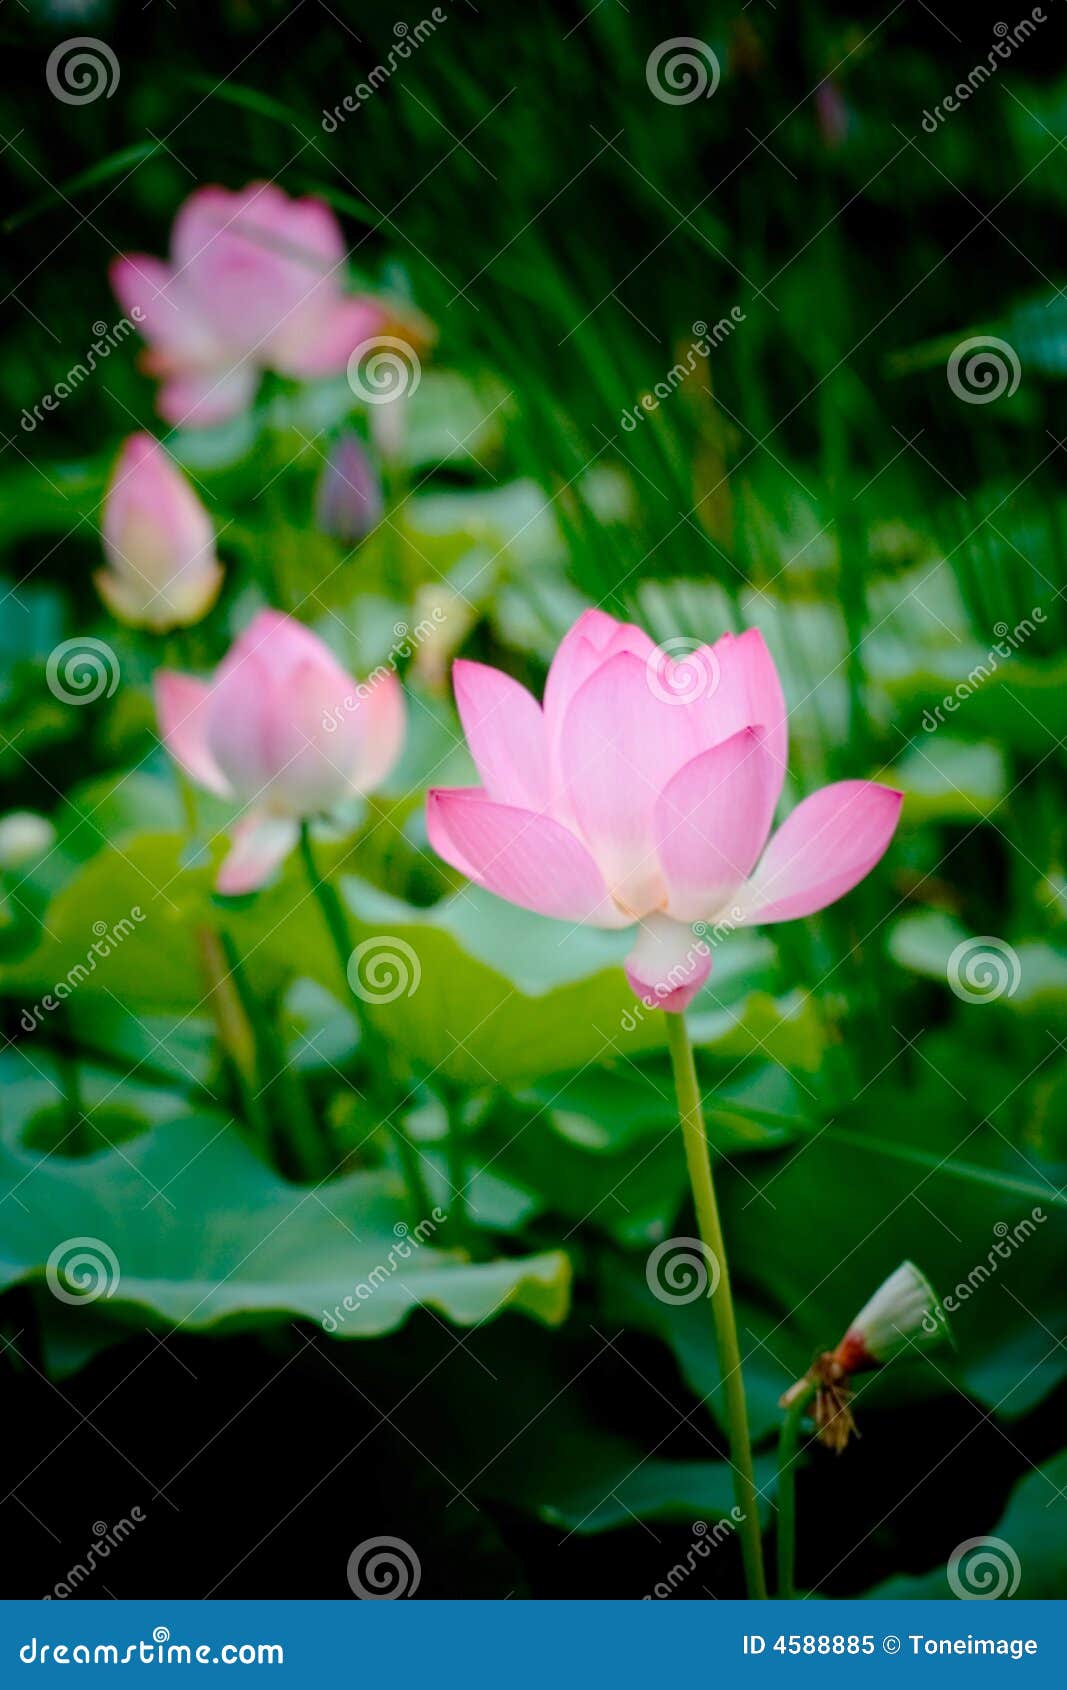 pure and clean lotus